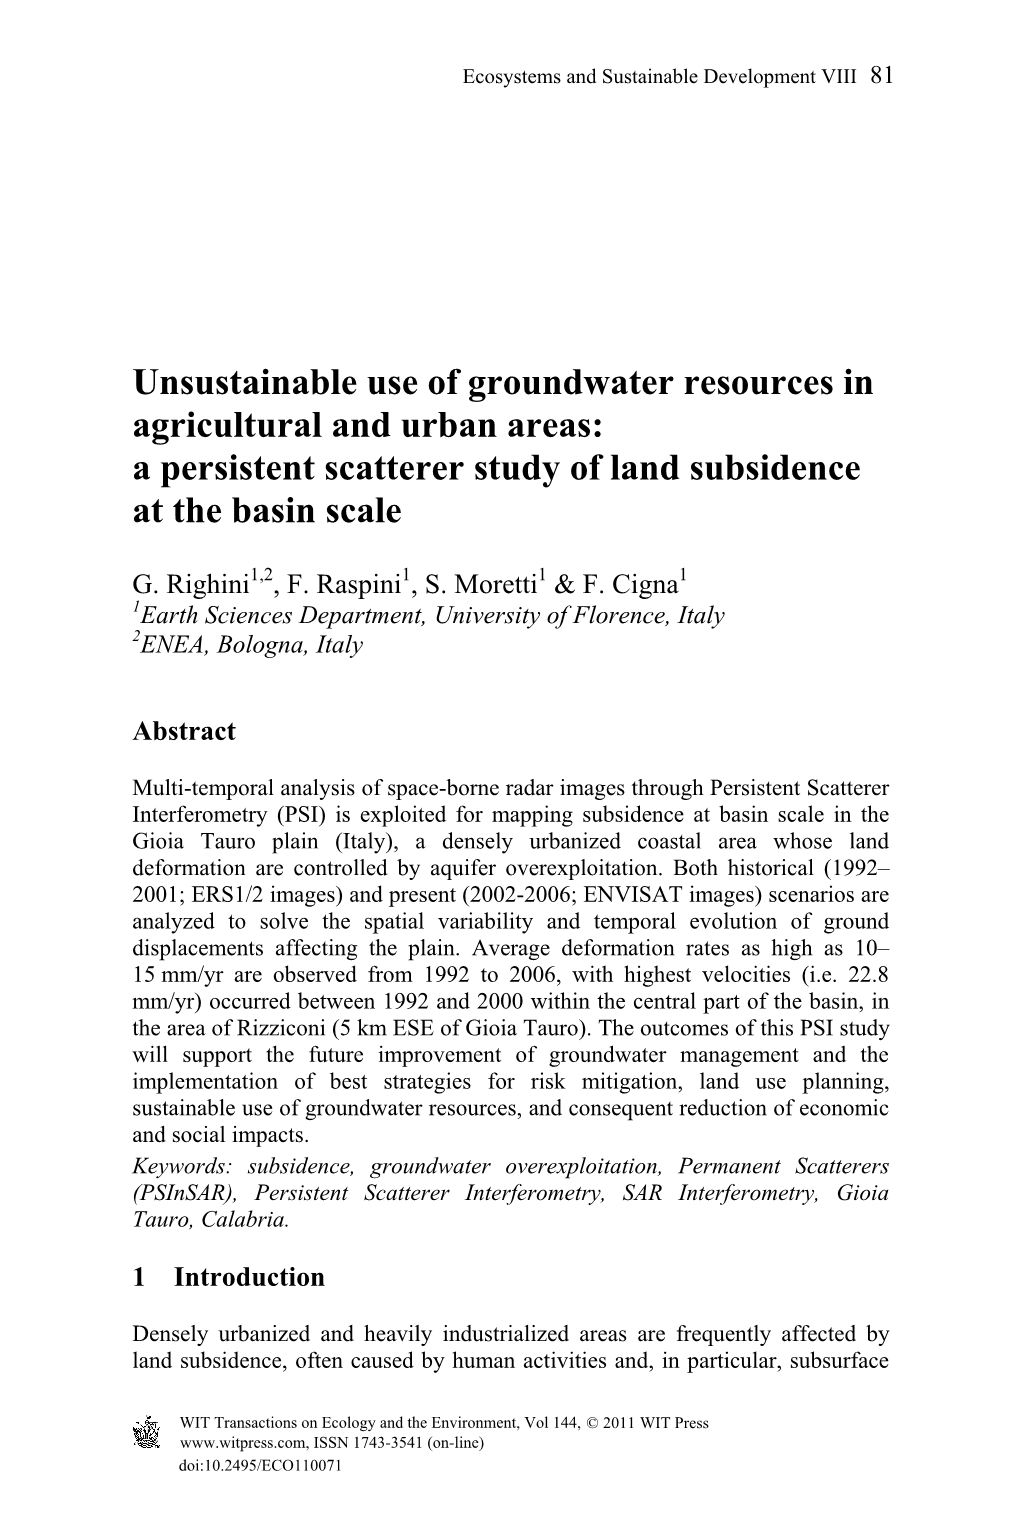 A Persistent Scatterer Study of Land Subsidence at the Basin Scale